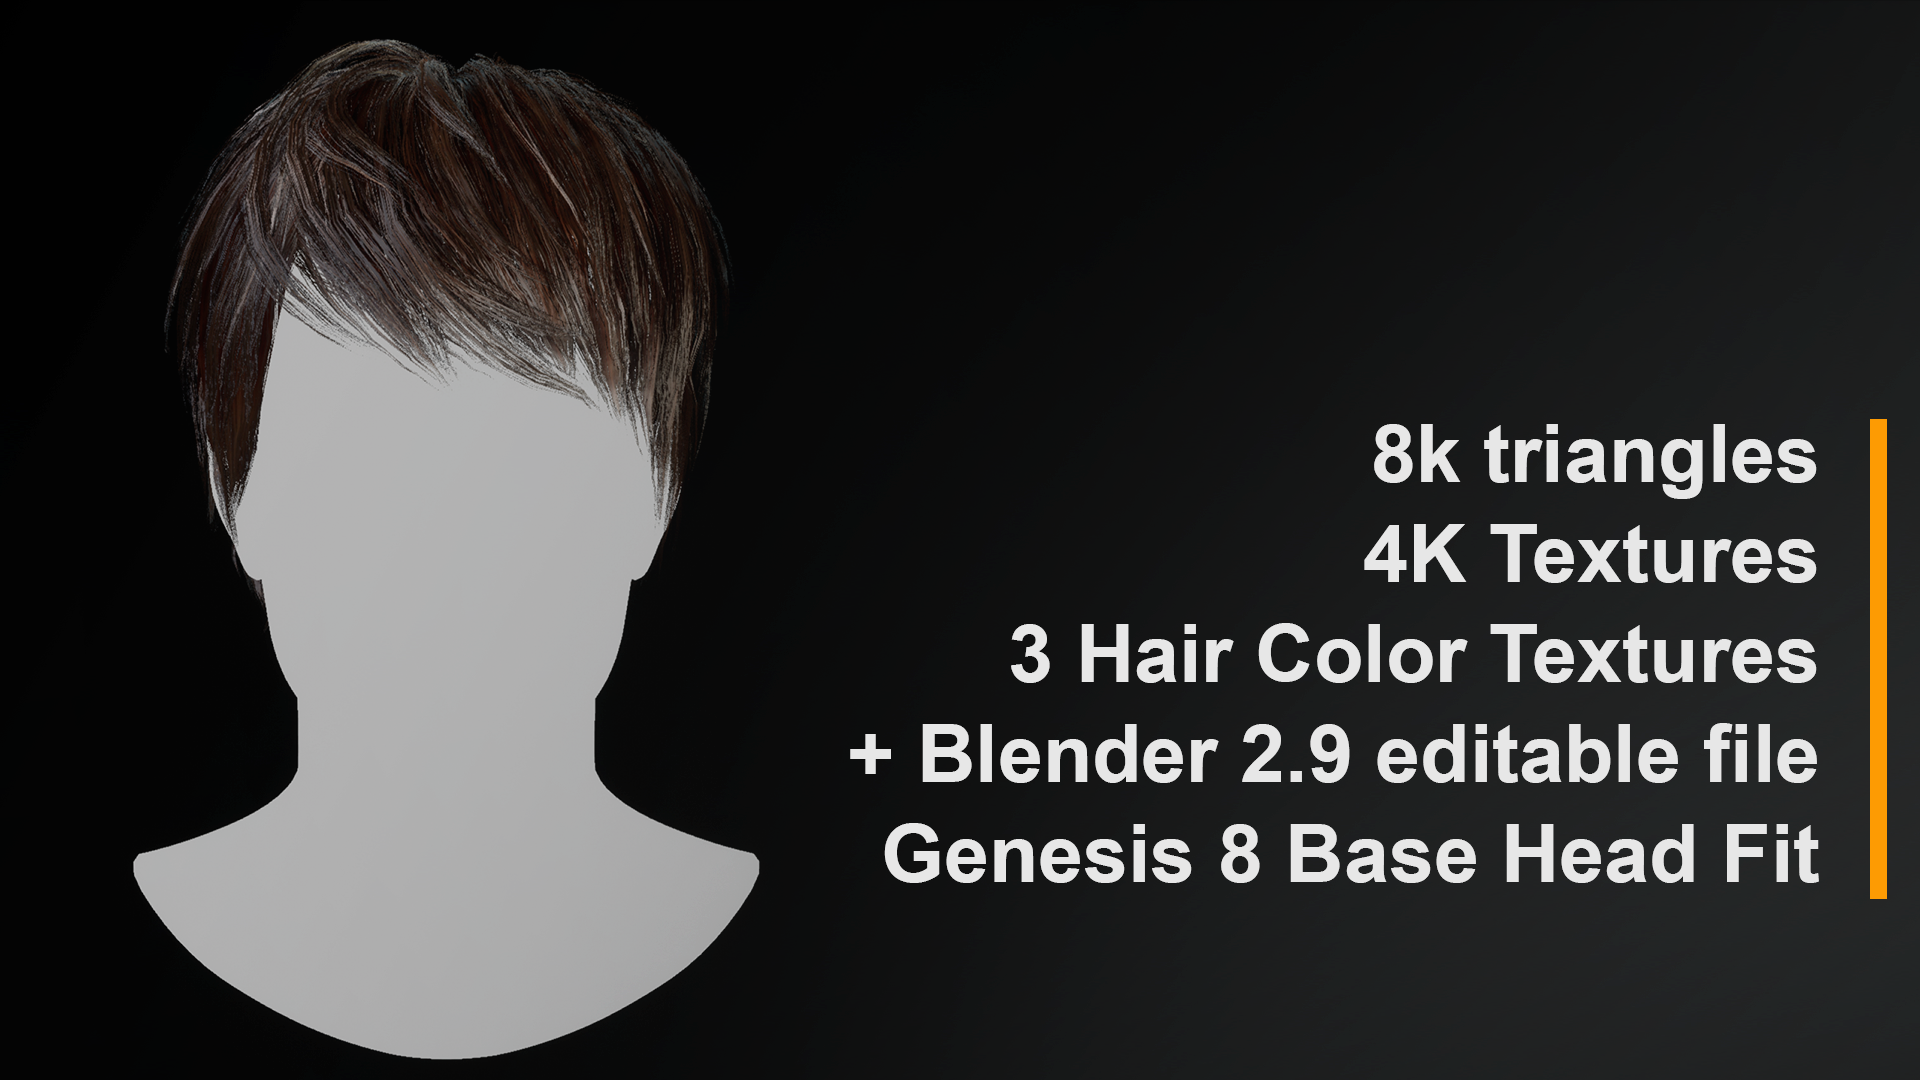 Low Poly Male Hair 